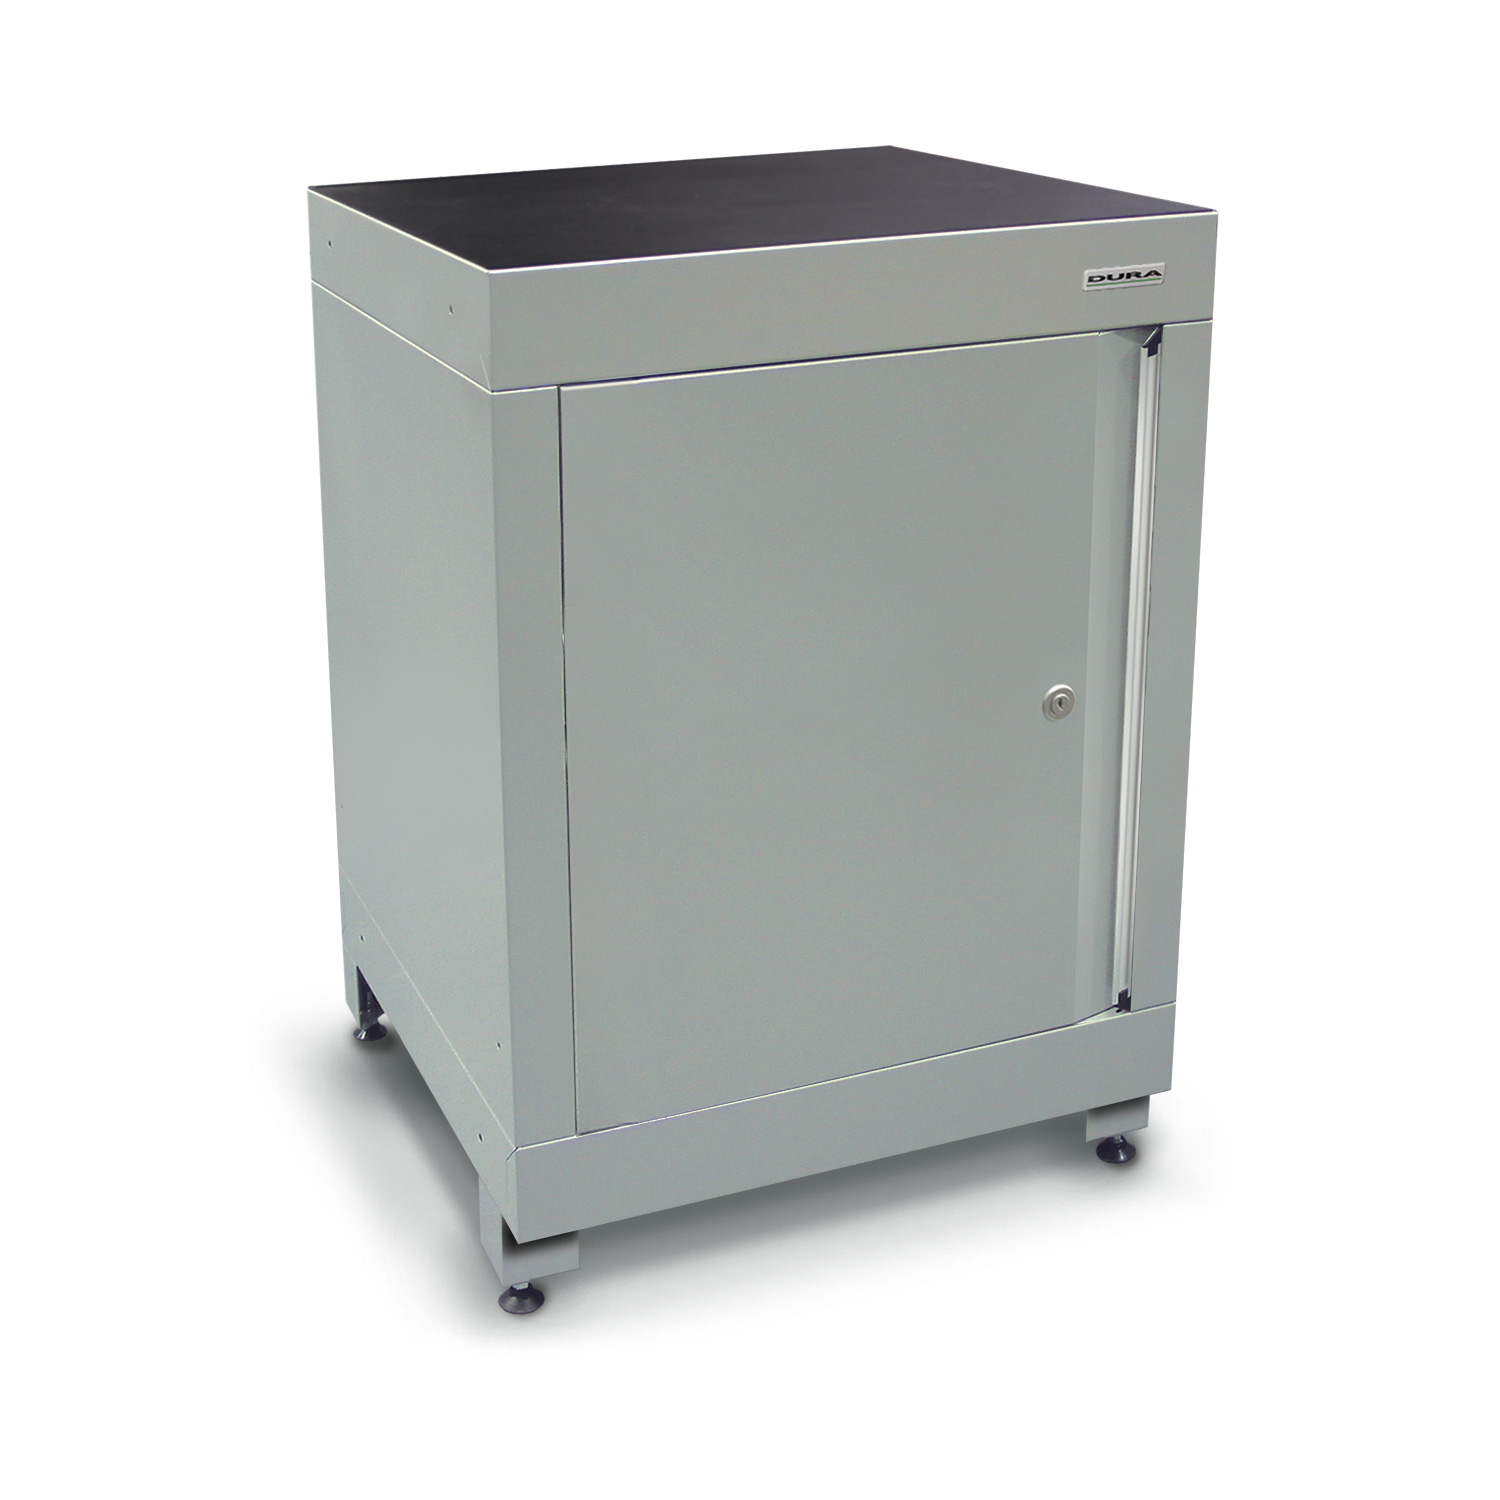 600 series cabinet (with 1 door/ left hand side and feet)